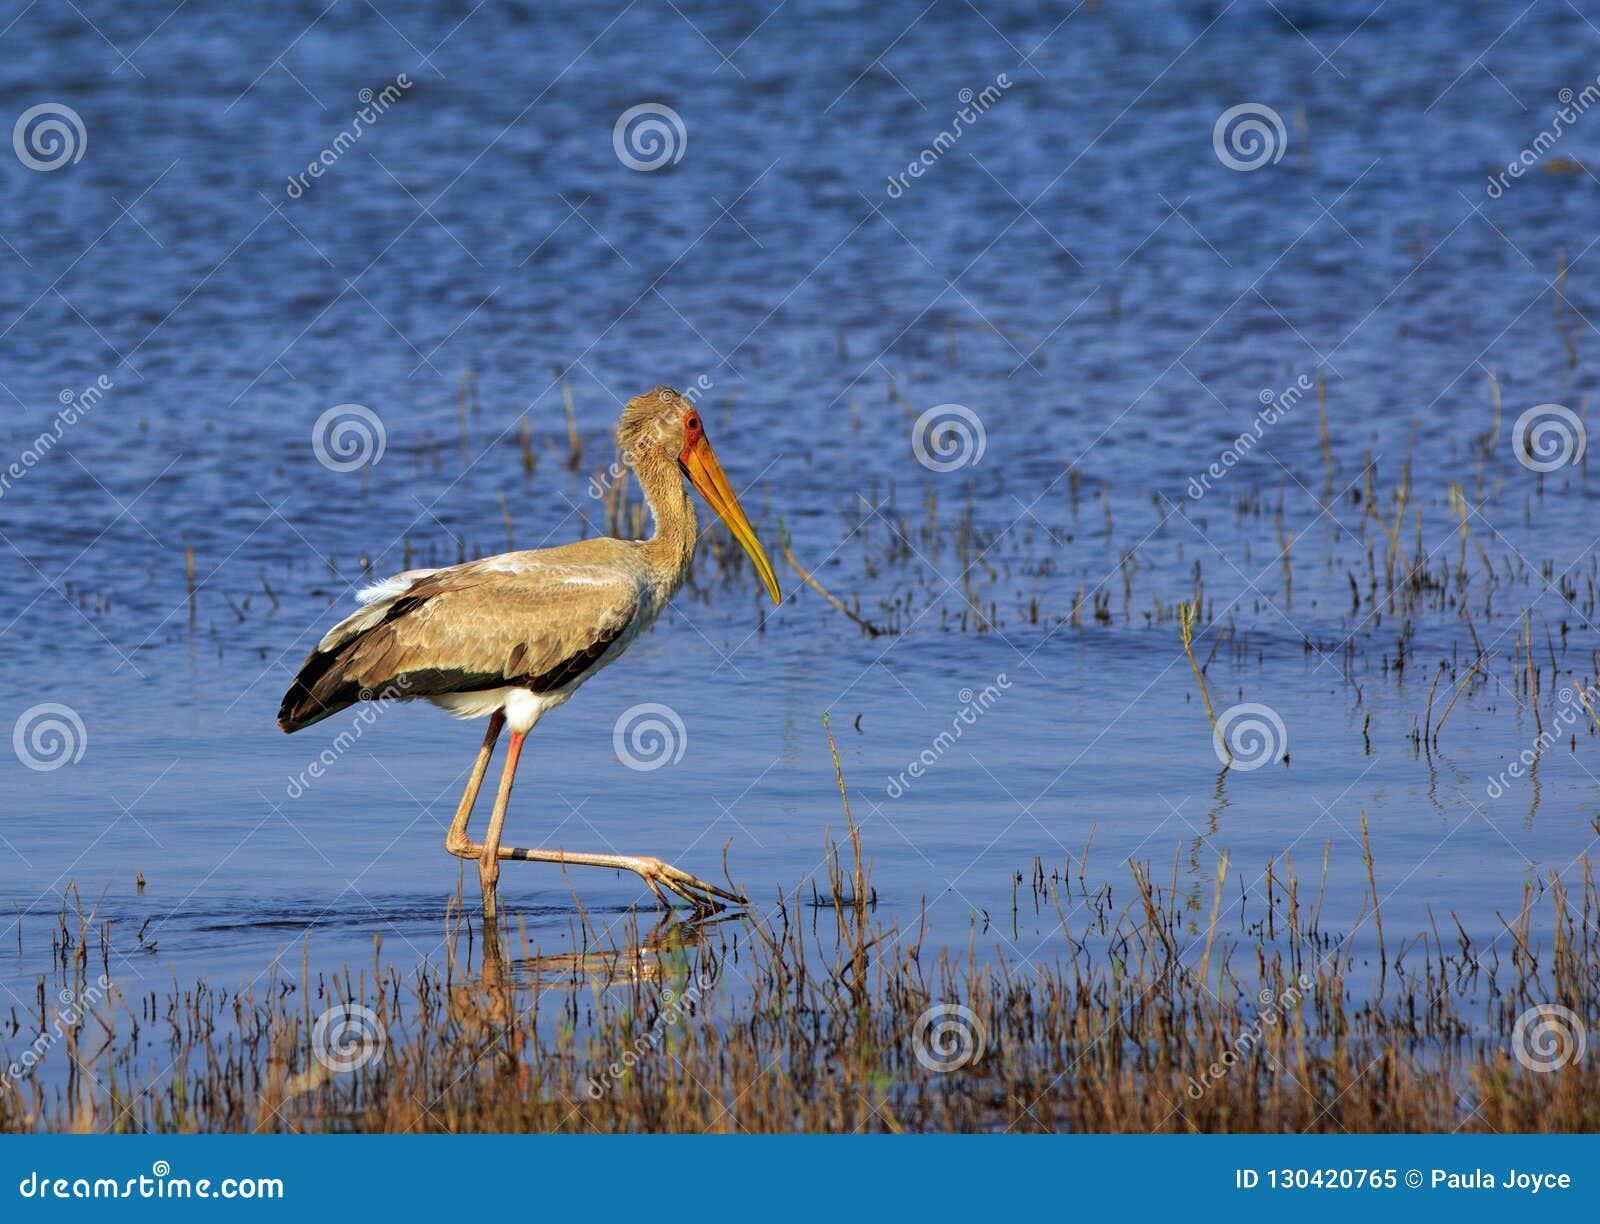 Yellow-billed Stork Wading on the Edge of a Vibrant Blue Lake in Lake ...